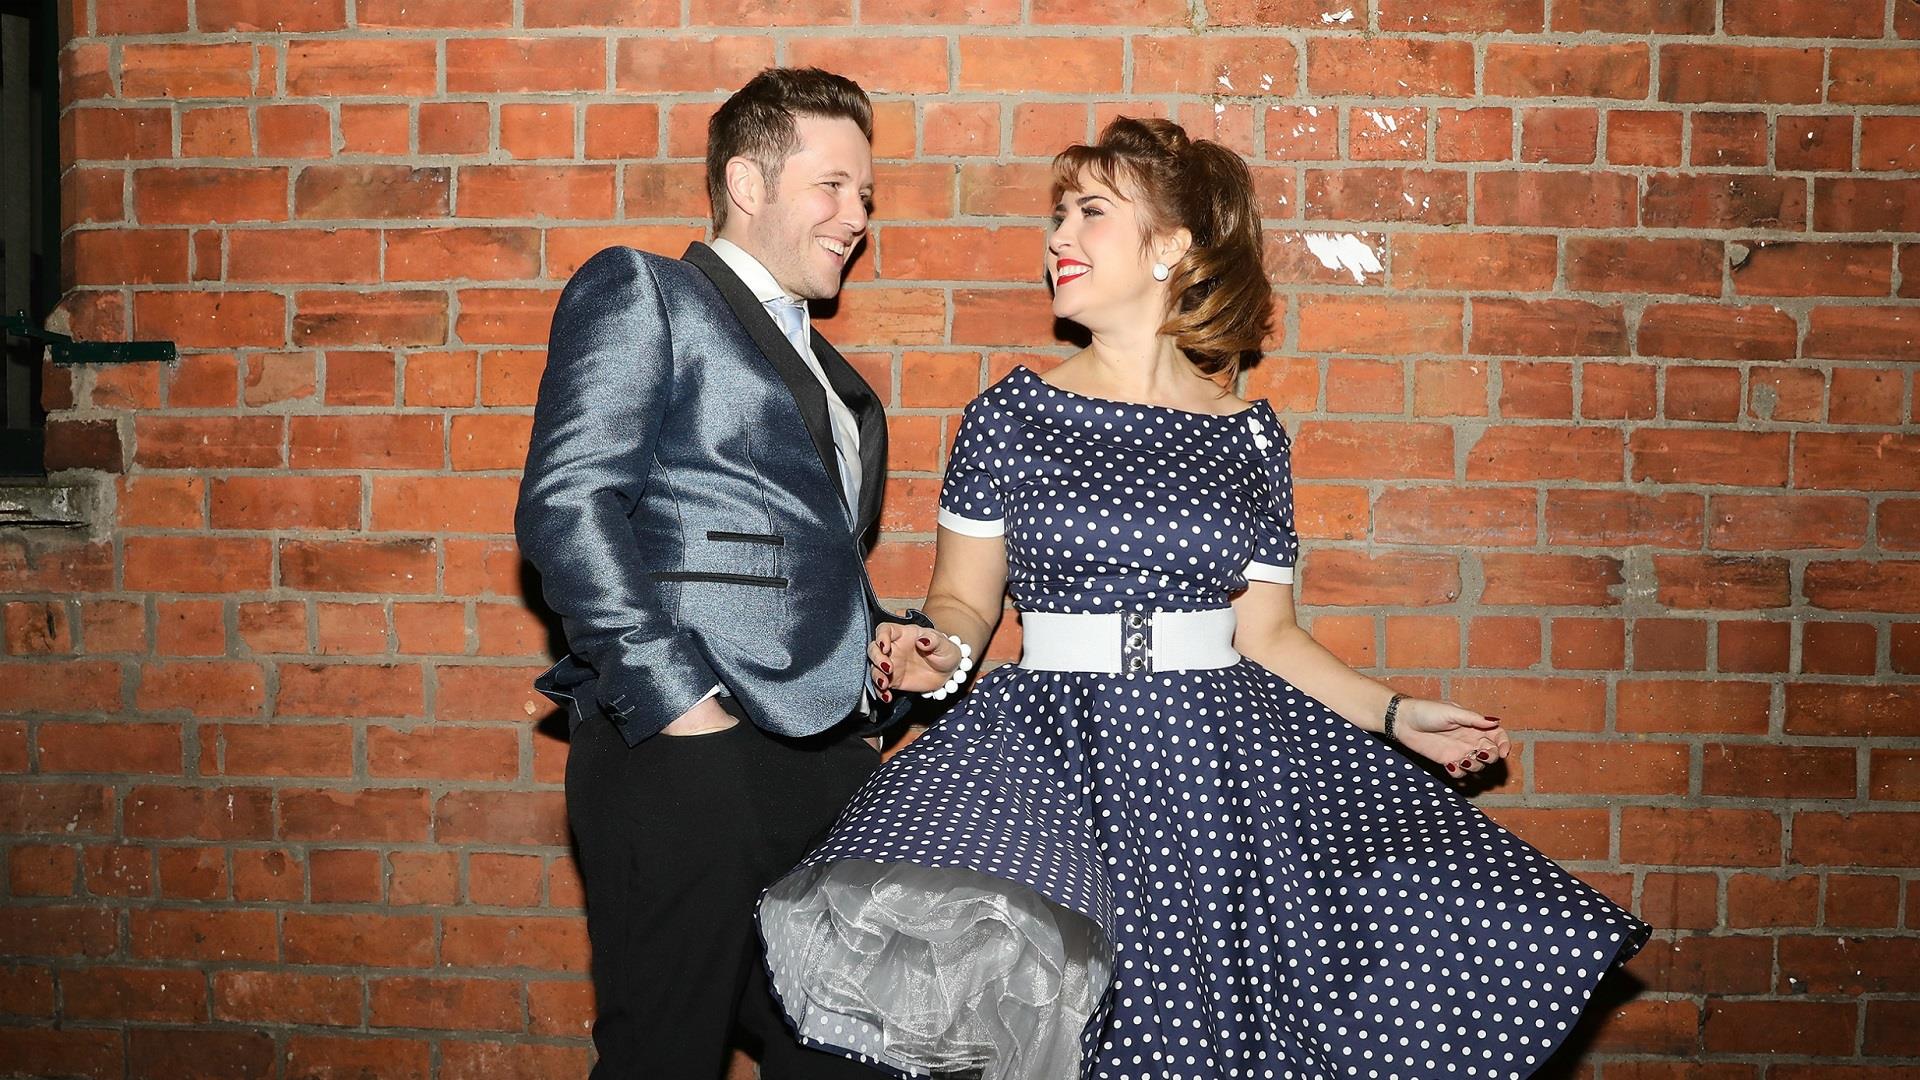 Picture of a man and a woman smiling at each other leading up against a wall. She is wearing a navy and white polka dot dress with a wide white belt,